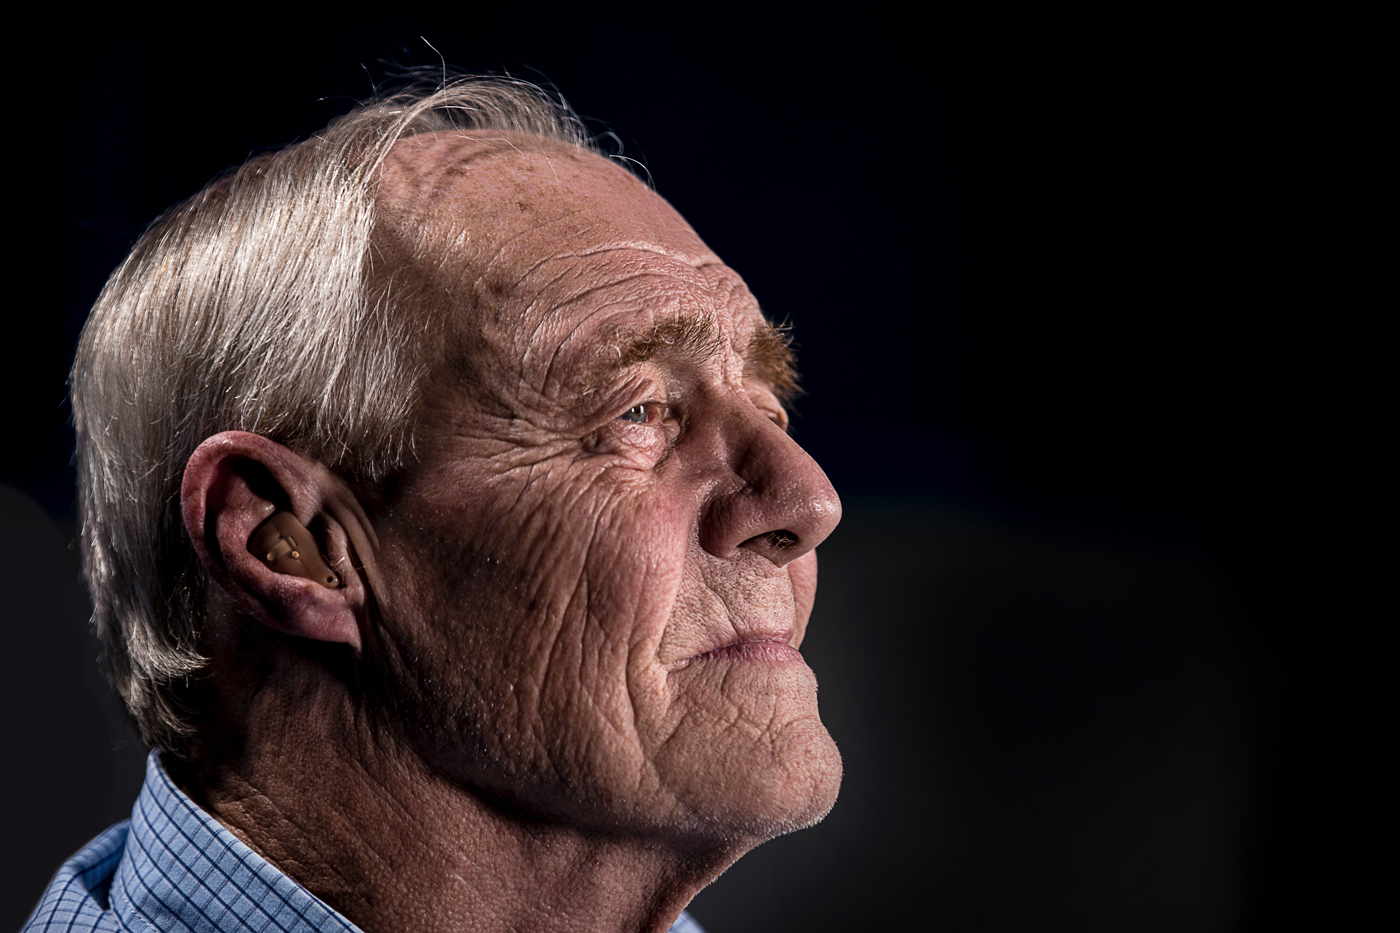 A smiling elderly person with a hearing aid in his ear